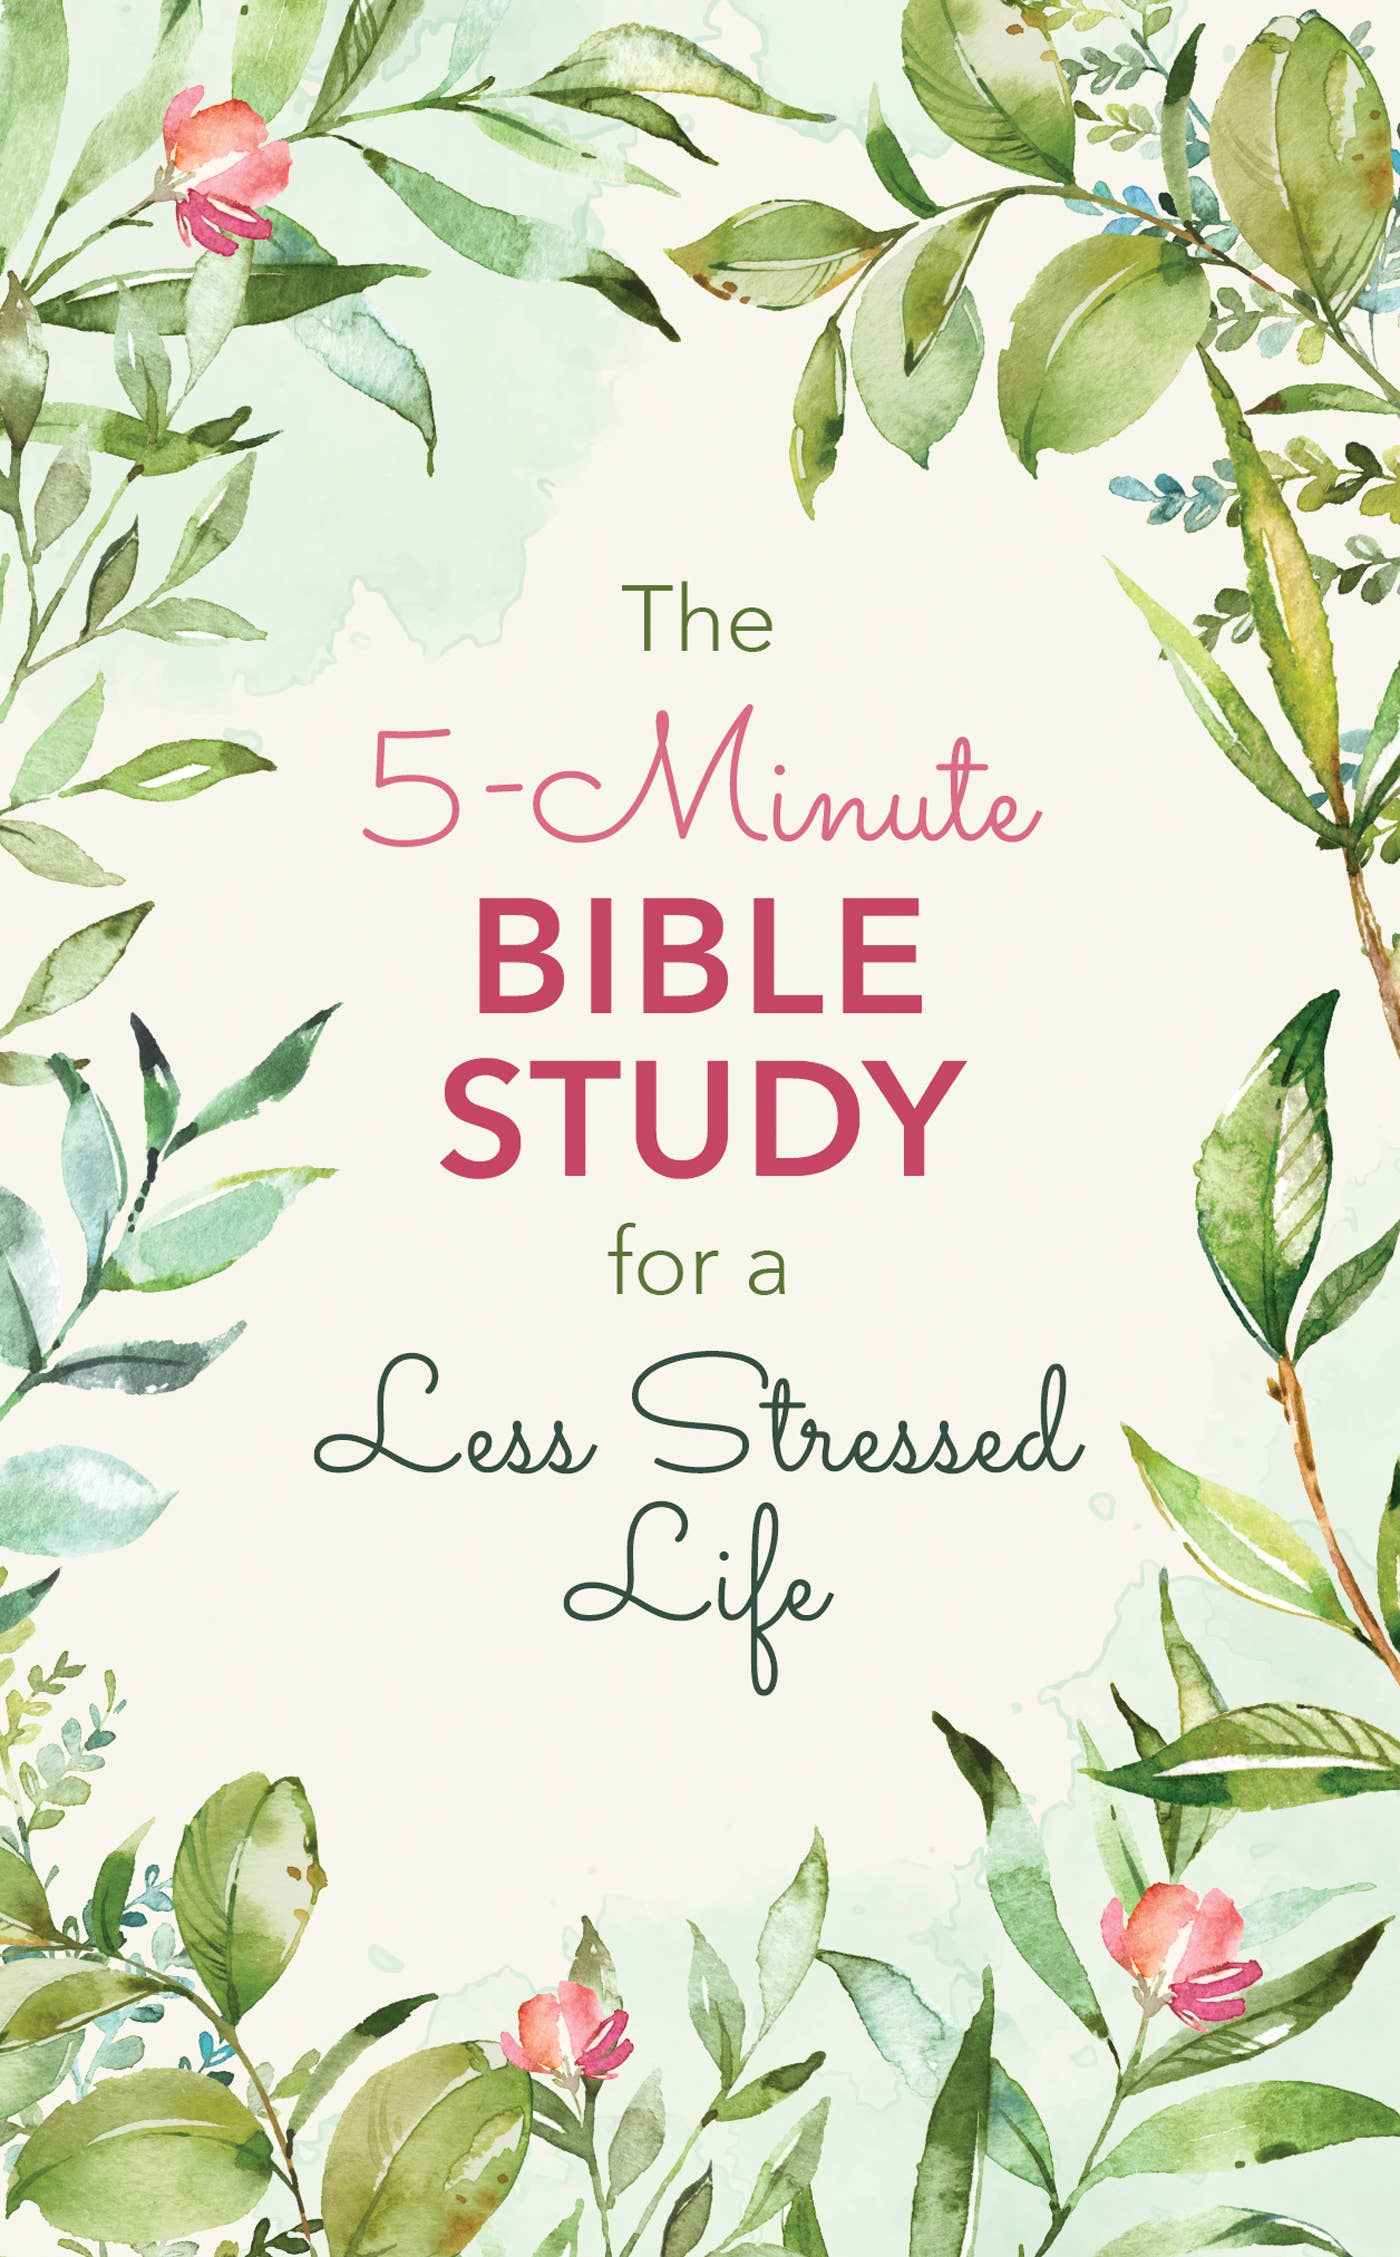 The 5-Minute Bible Study for a Less Stressed Life